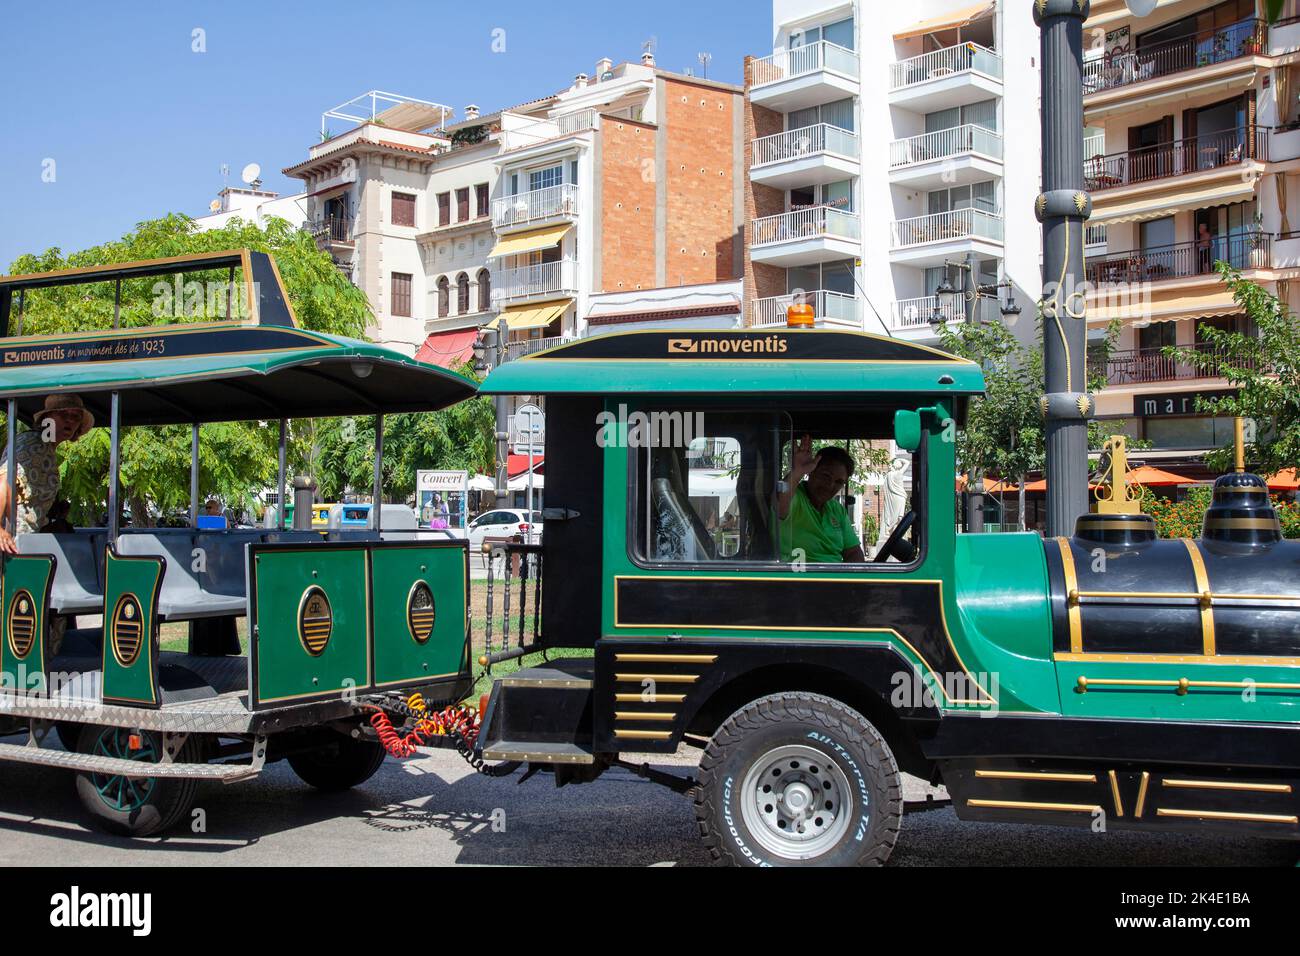 Local Moventis Tourist train in Sitges, Spain Stock Photo